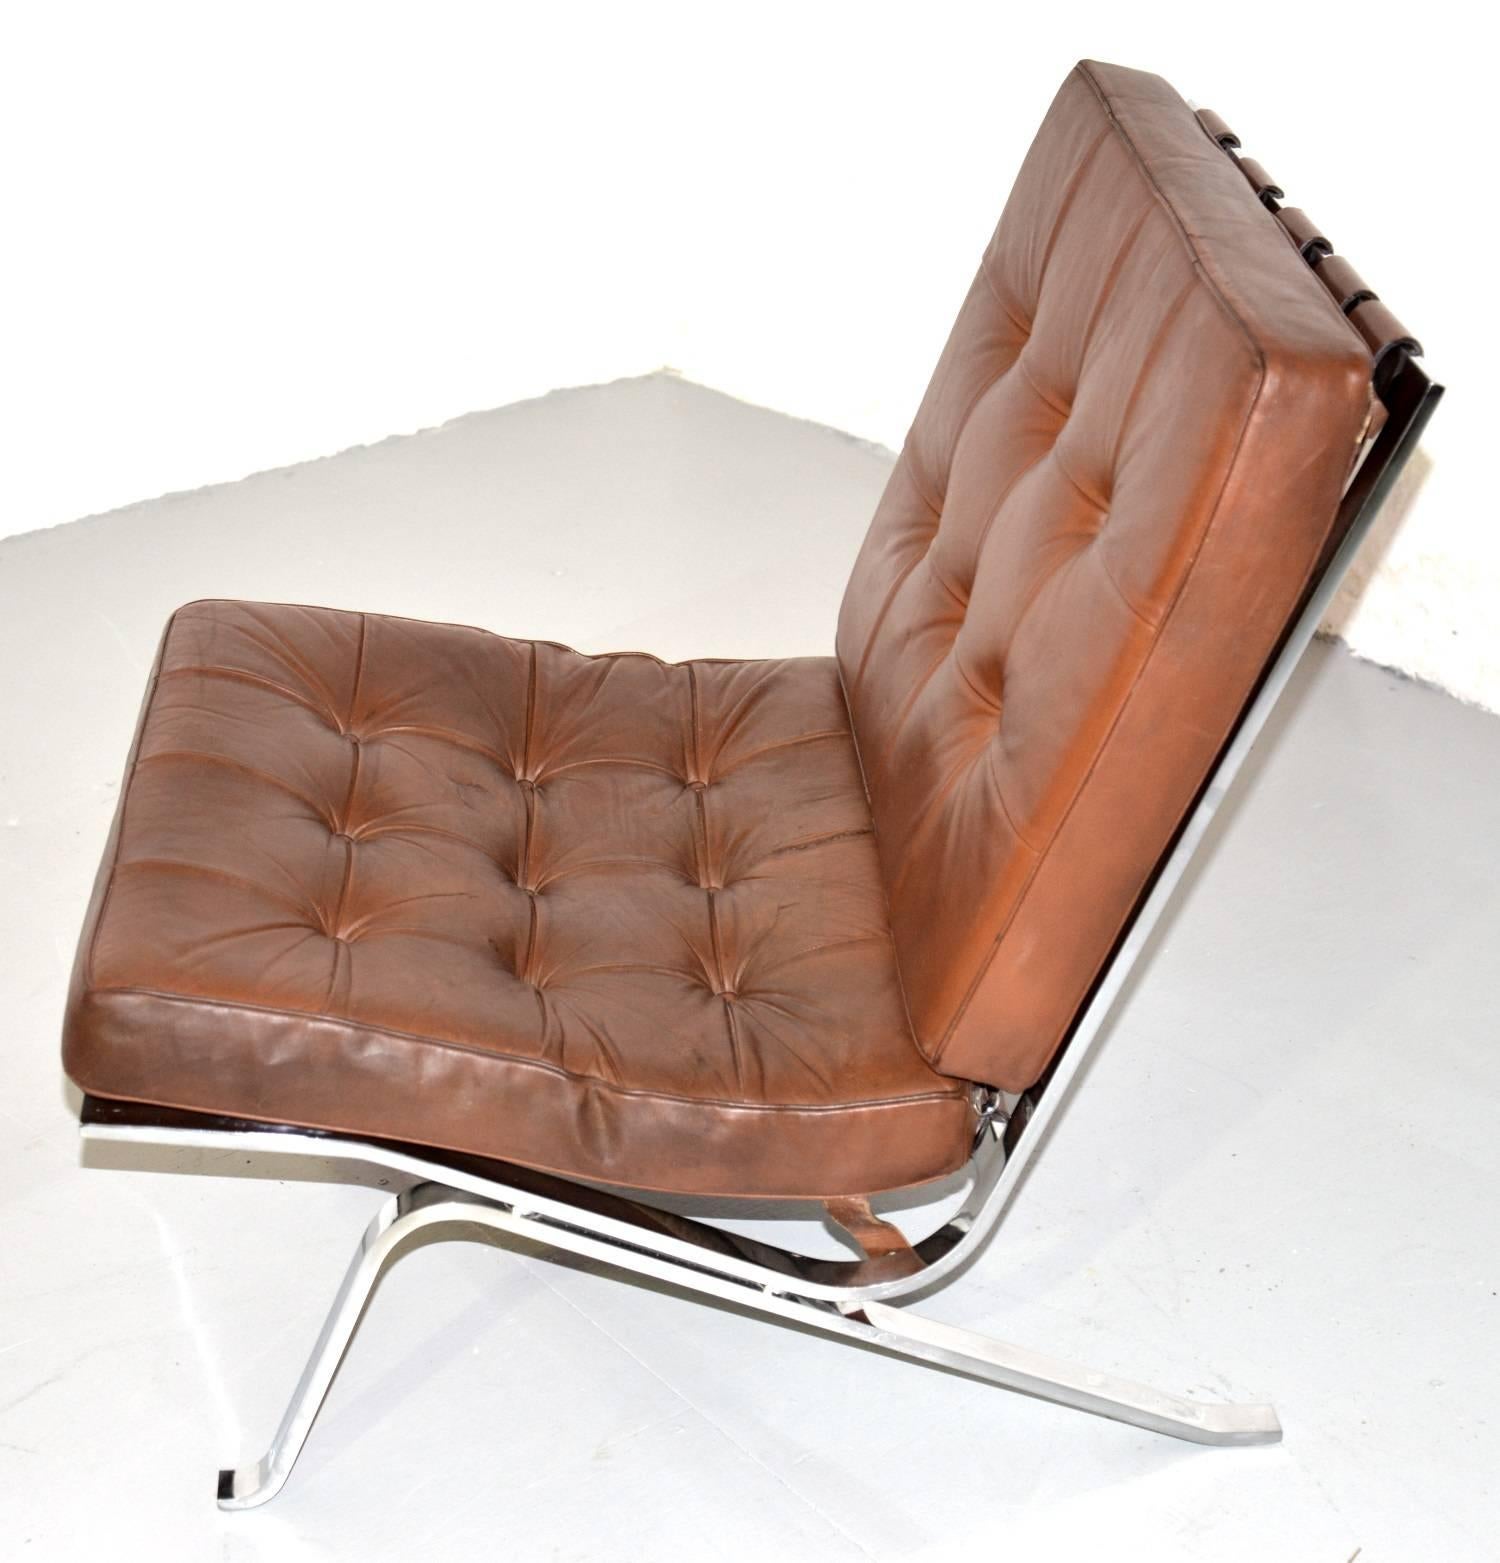 Discounted shipping rates for our US and International customers (from 2 weeks door to door)

We are delighted to bring to you a rare vintage RH-301 flat bar lounge chair in original tan leather designed by Robert Haussmann for de Sede. Hand built